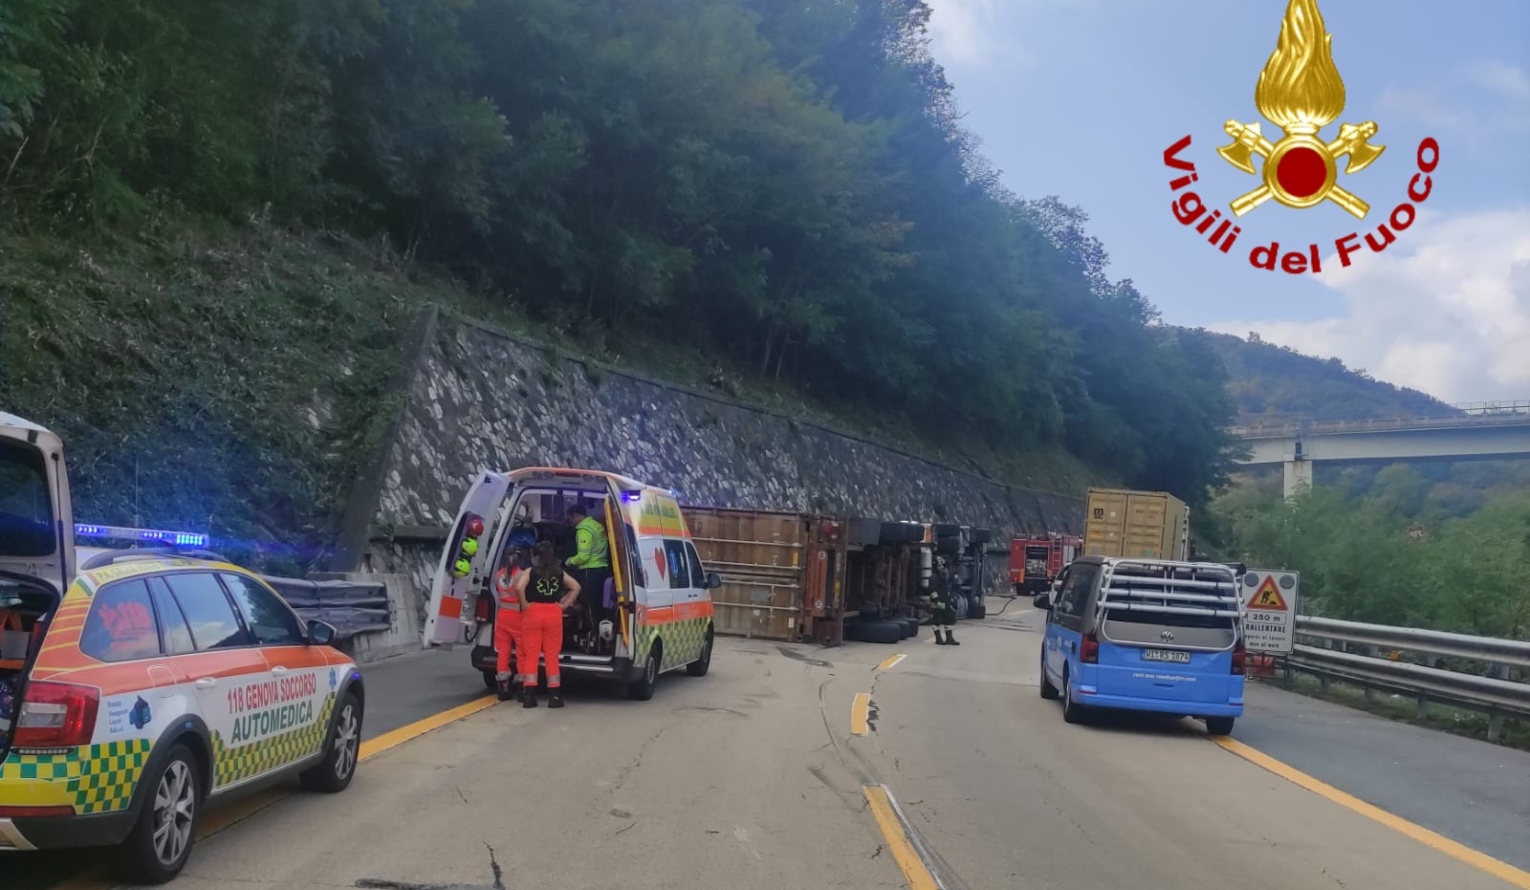 Caos autostrade, camion si ribalta in A7: autista in ospedale